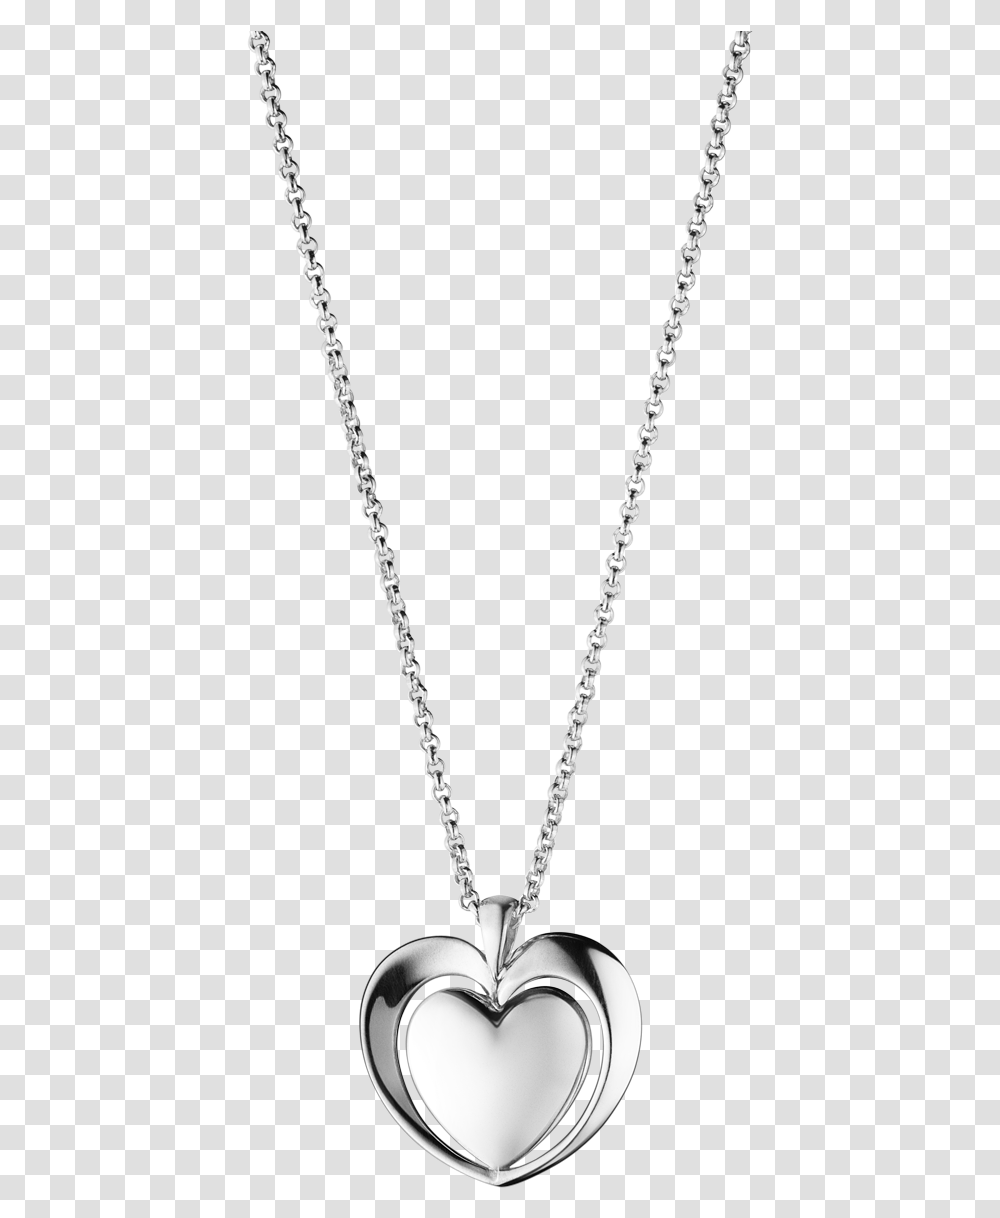 Library Of Heart Necklace Clip Free Files Silver Heart Necklace, Jewelry, Accessories, Accessory, Locket Transparent Png